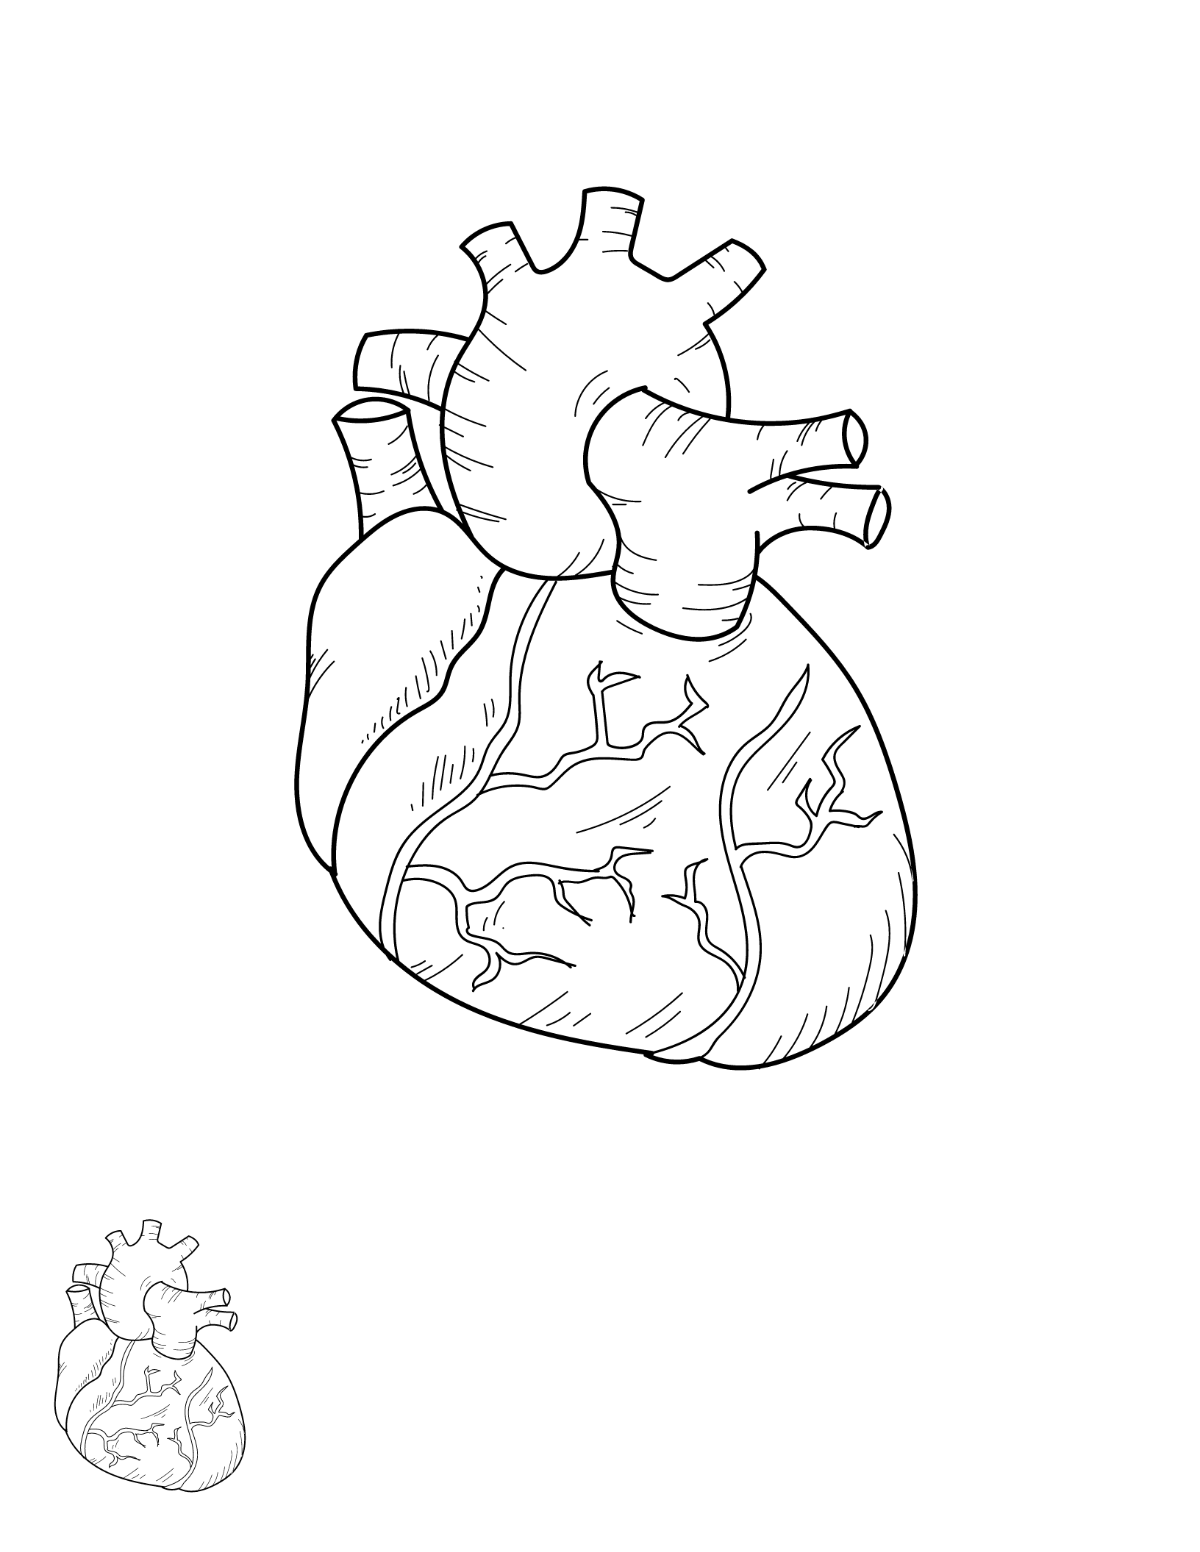 Human Heart Coloring Page Template